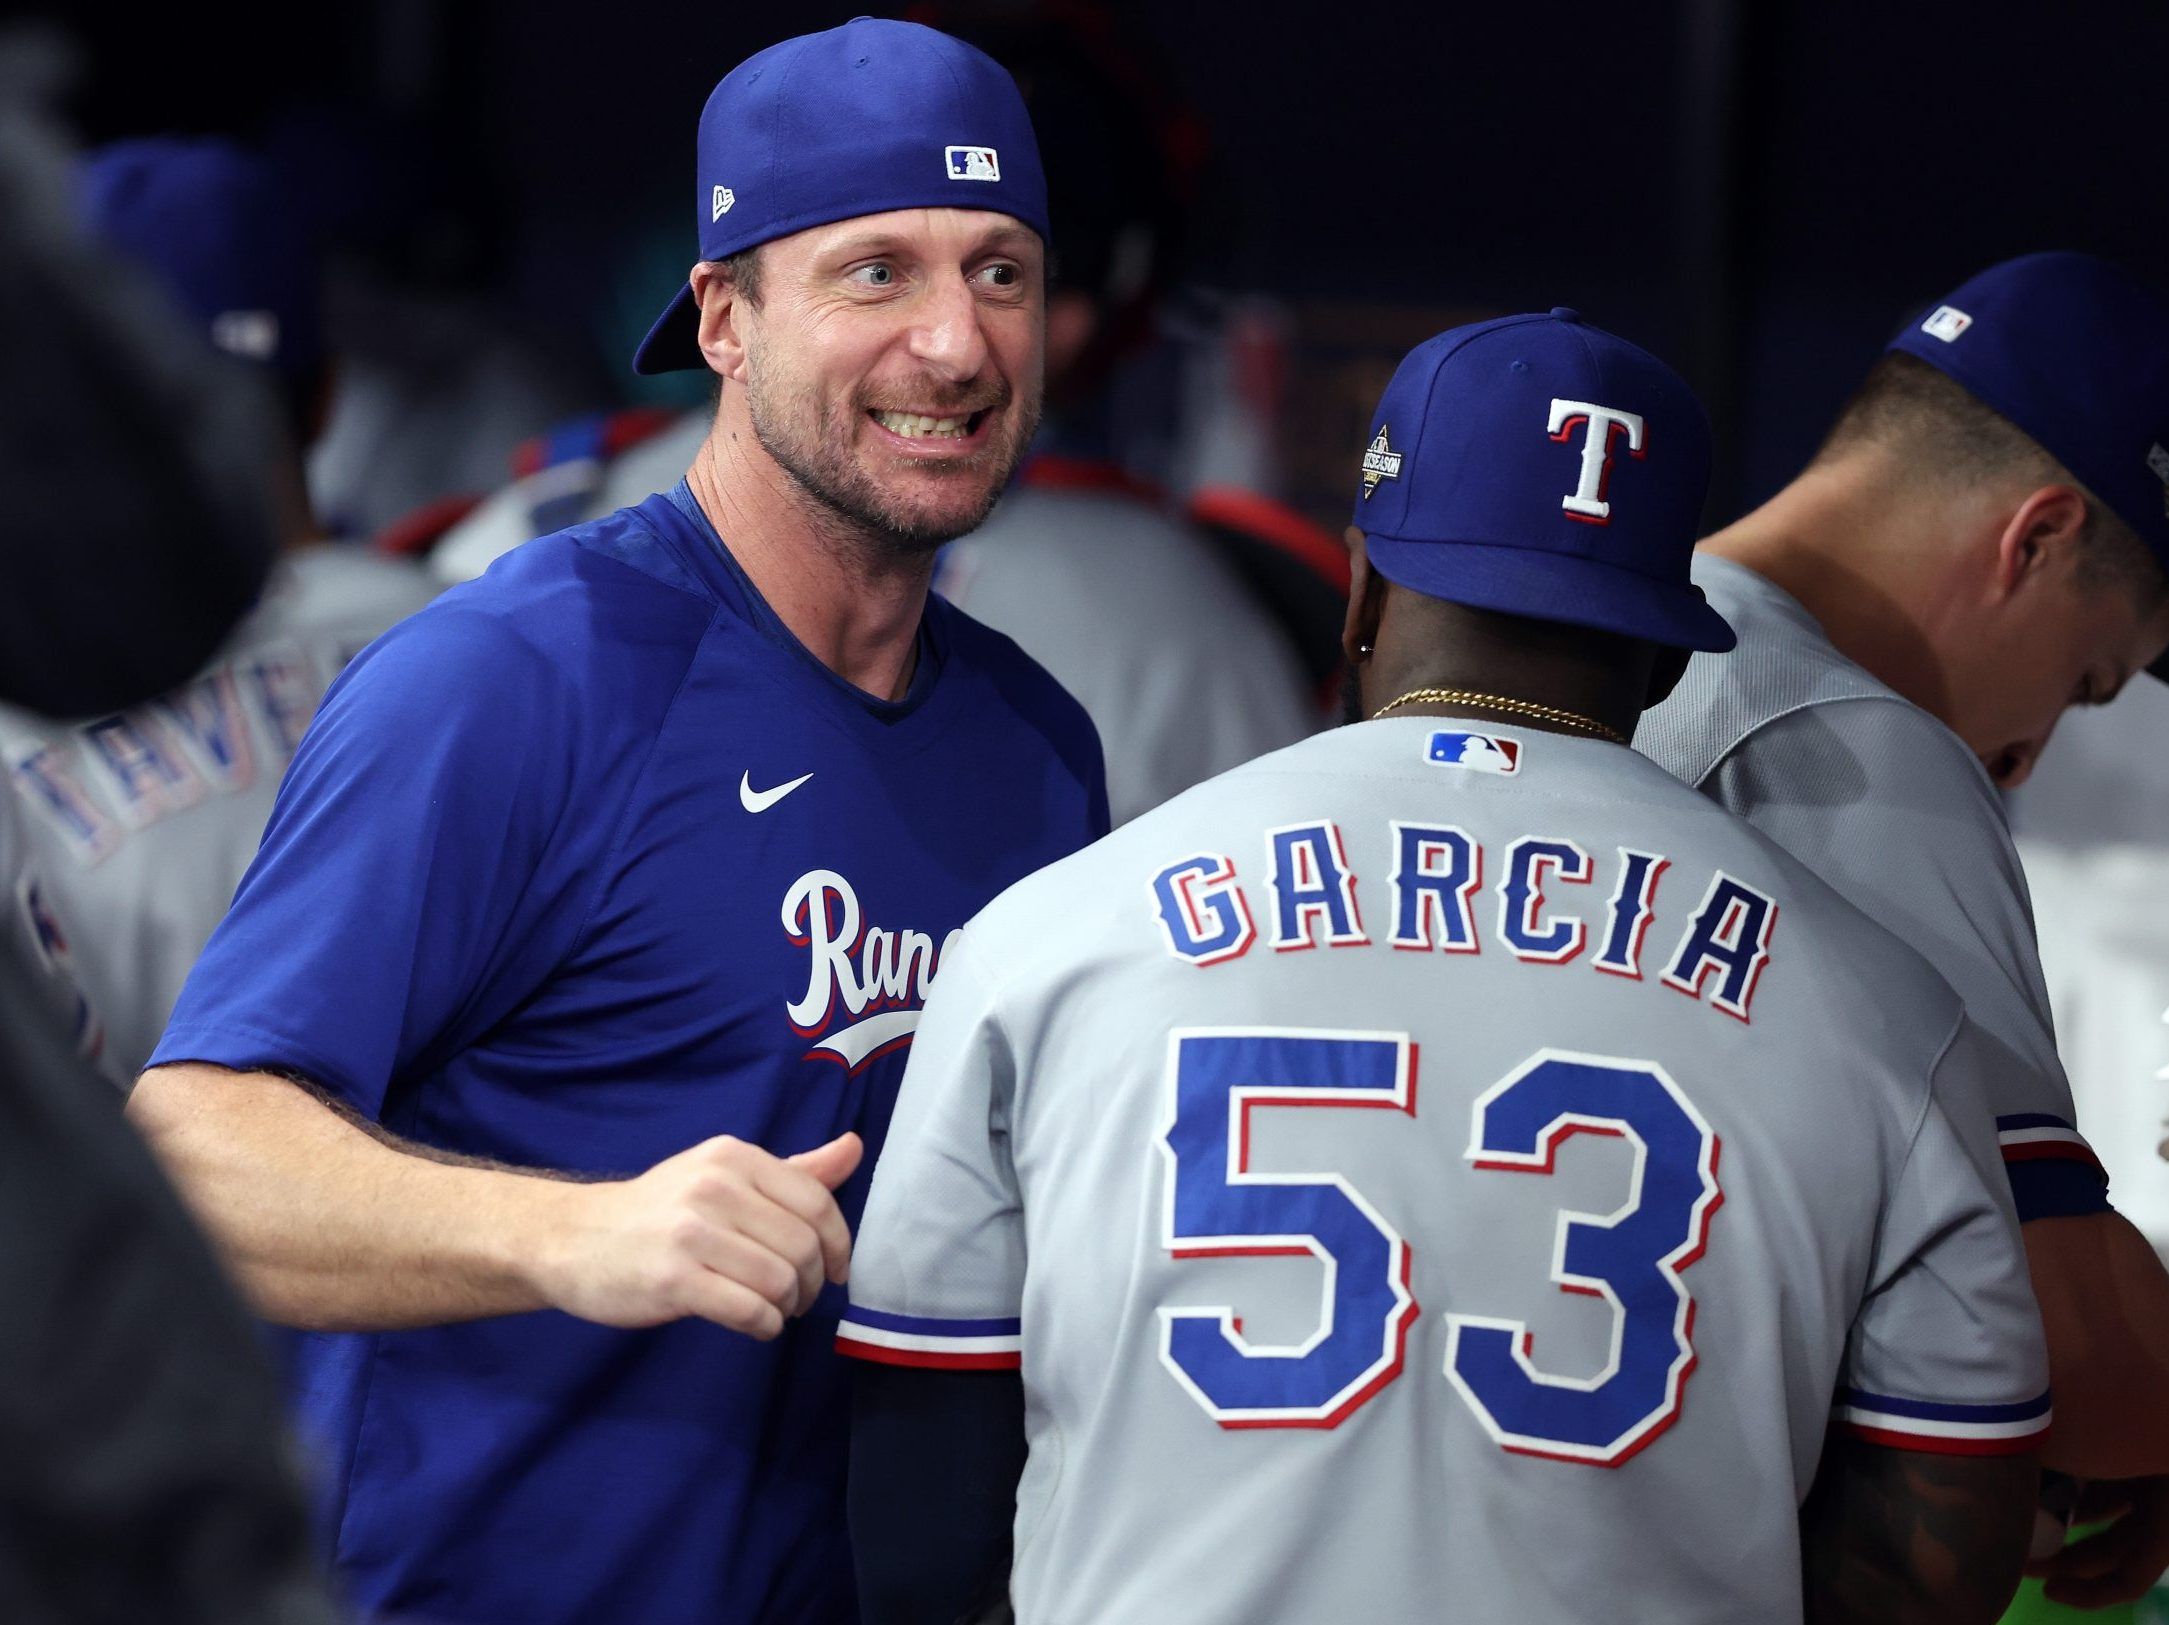 Max Scherzer to start Game 3 of ALCS for Texas Rangers against